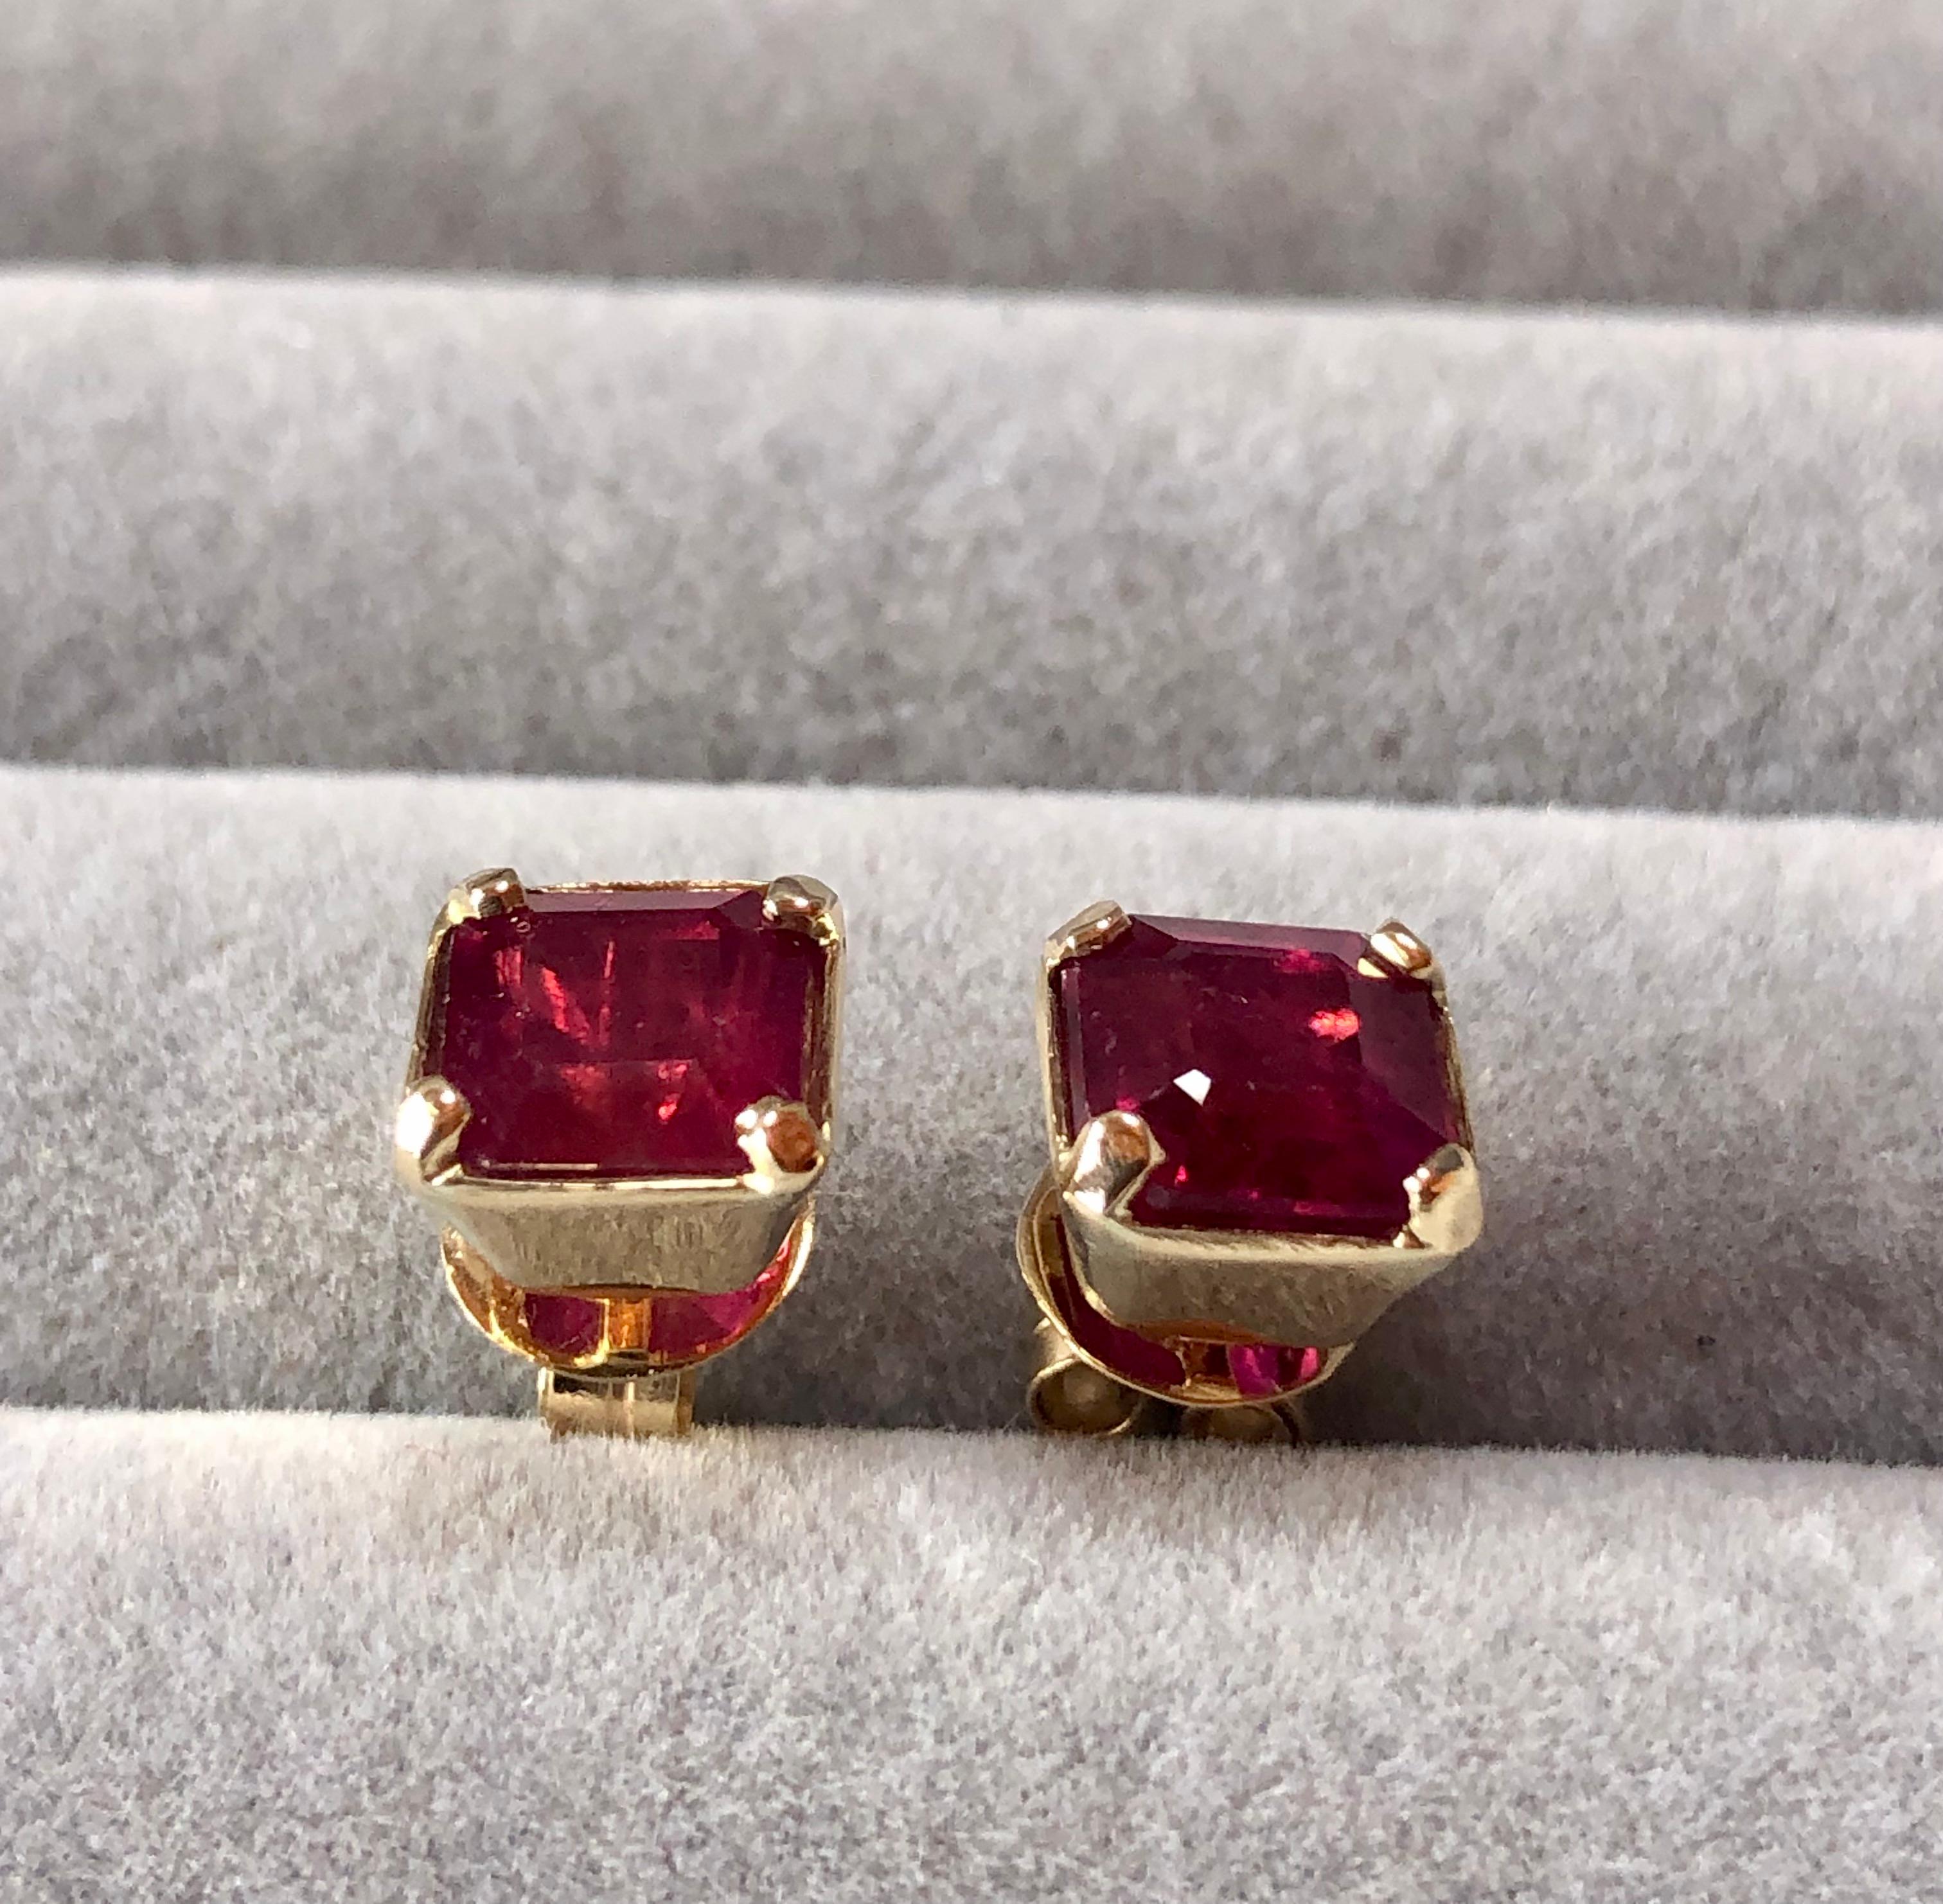 A sweet estate square ruby studs with mega sparkle, these Approx. 4.00-carat ruby 18k yellow gold earrings are crafted with two  7.6 x 7.5mm square-shaped, glass-filled rubies treated in a 4-prong square box setting 18K yellow gold weight 3.8g. Push